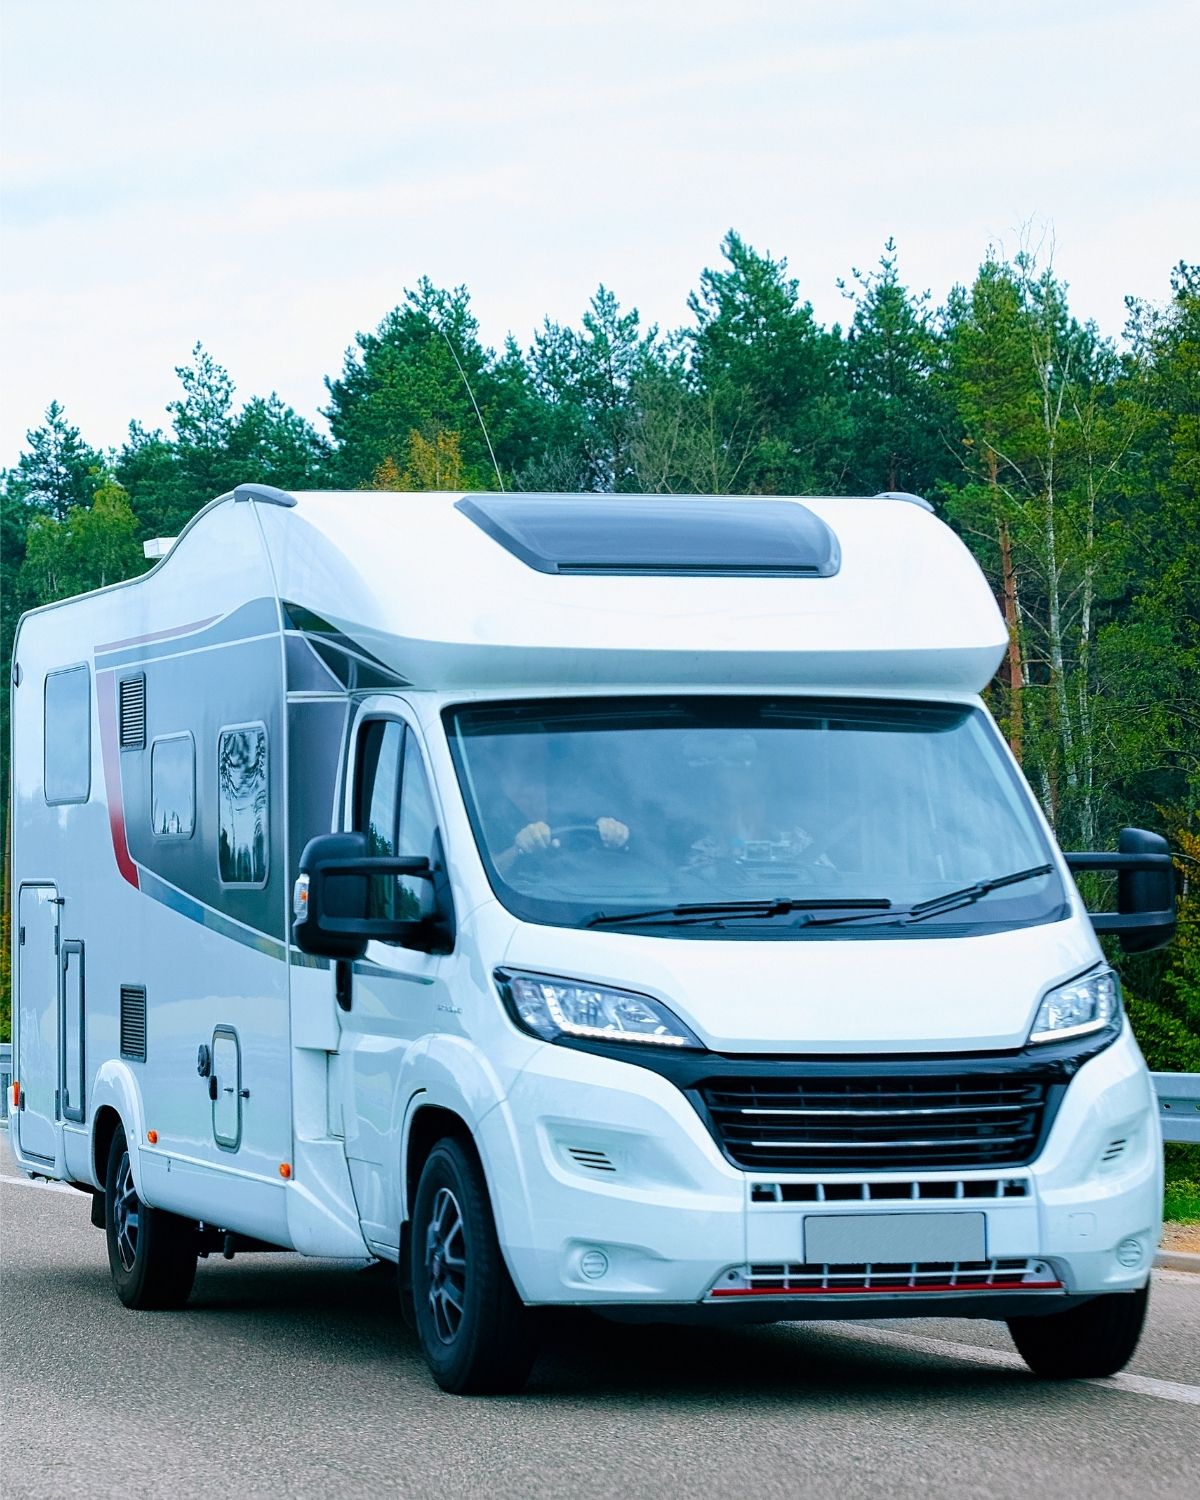 Tips for choosing the Best RV Size